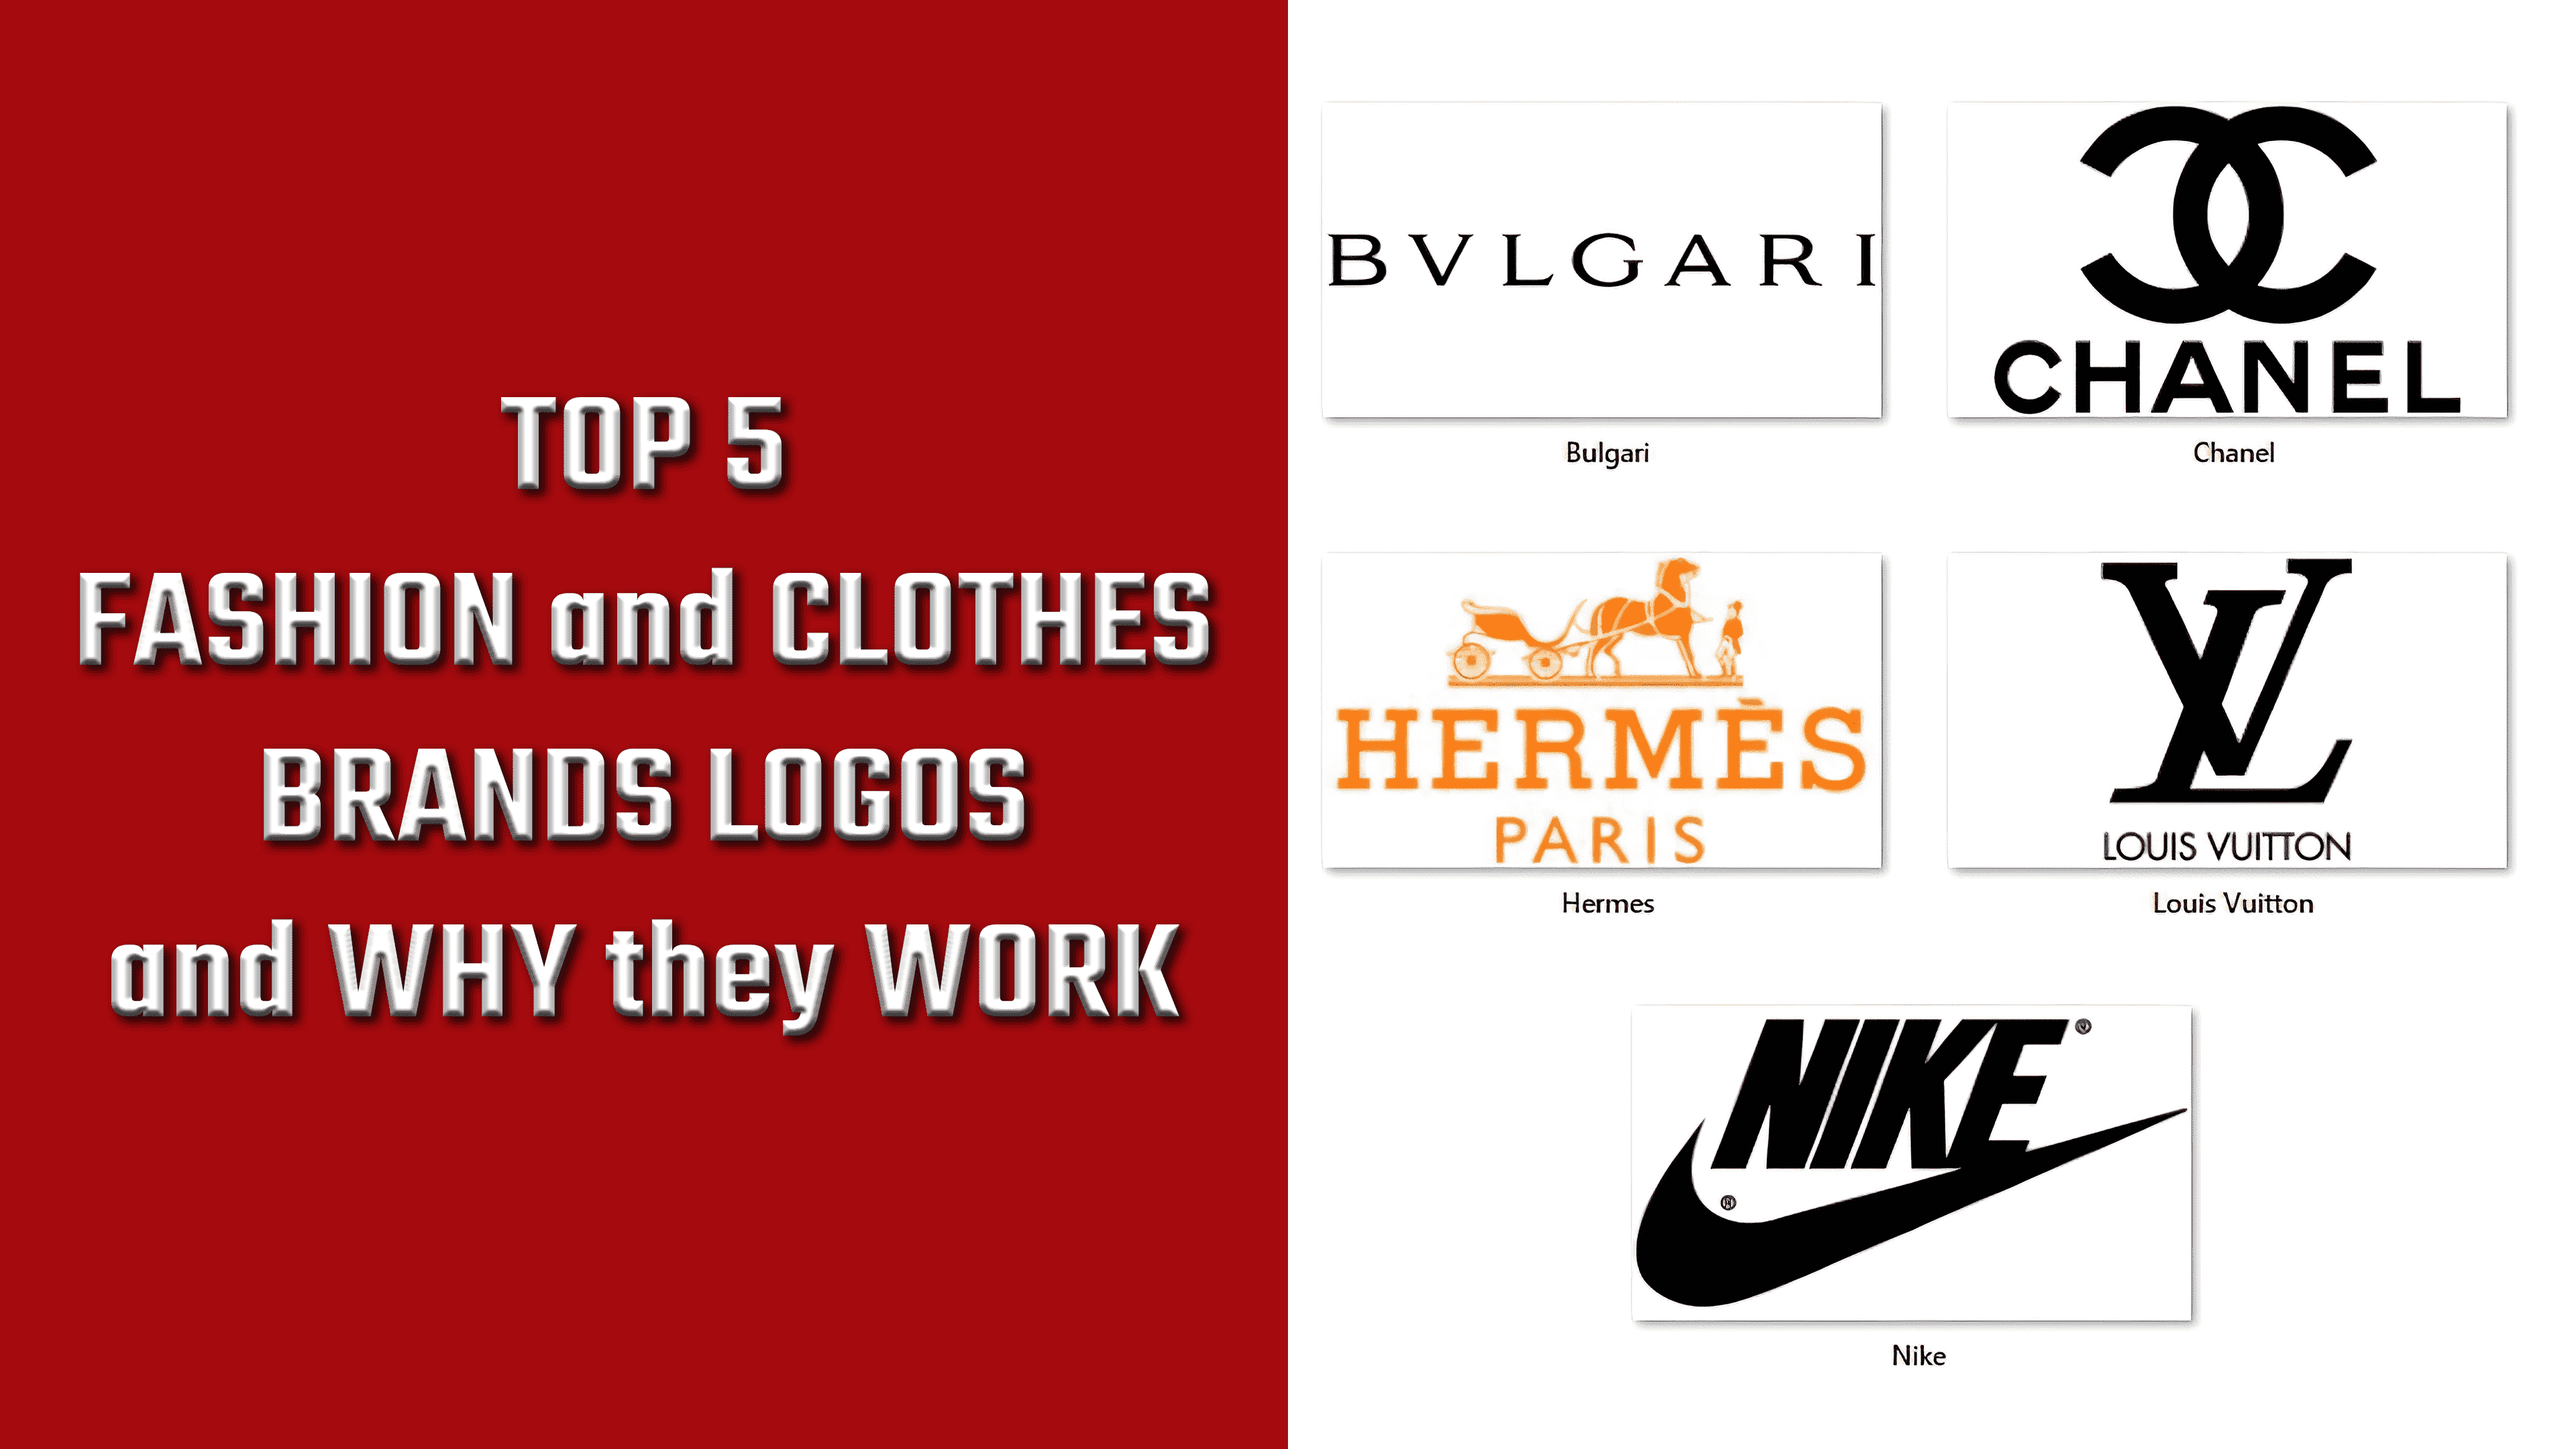 20+ famous clothing brand logos. Fashion trends come and go, but